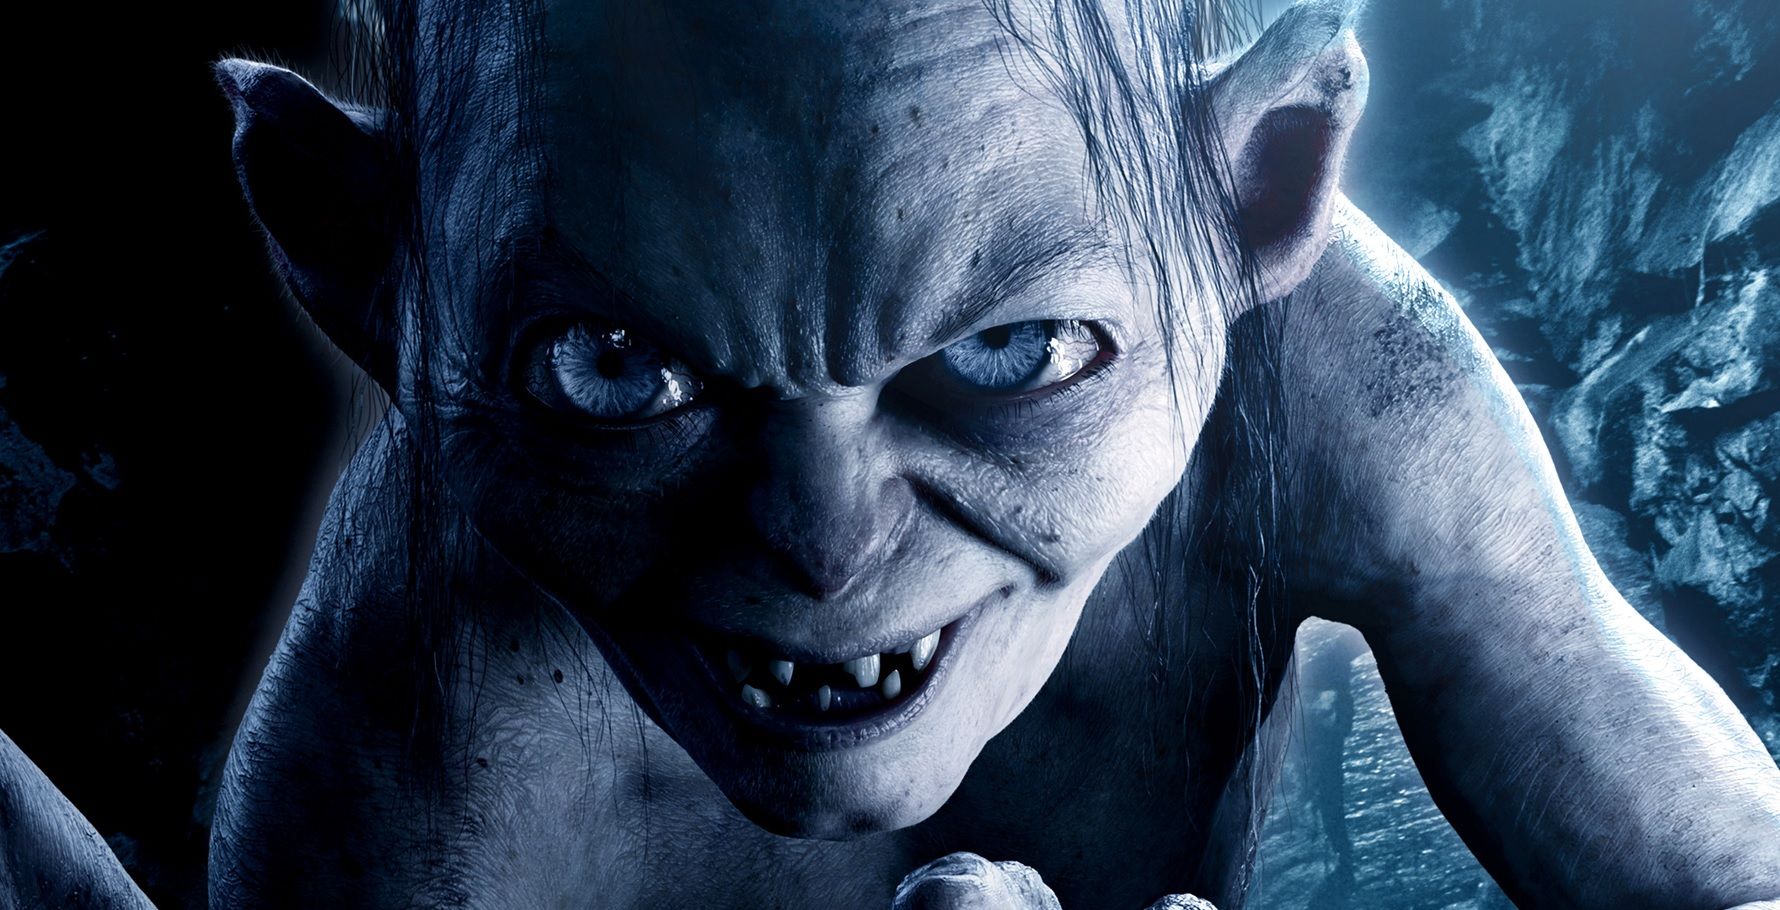 lord of the rings gollum vs smeagol